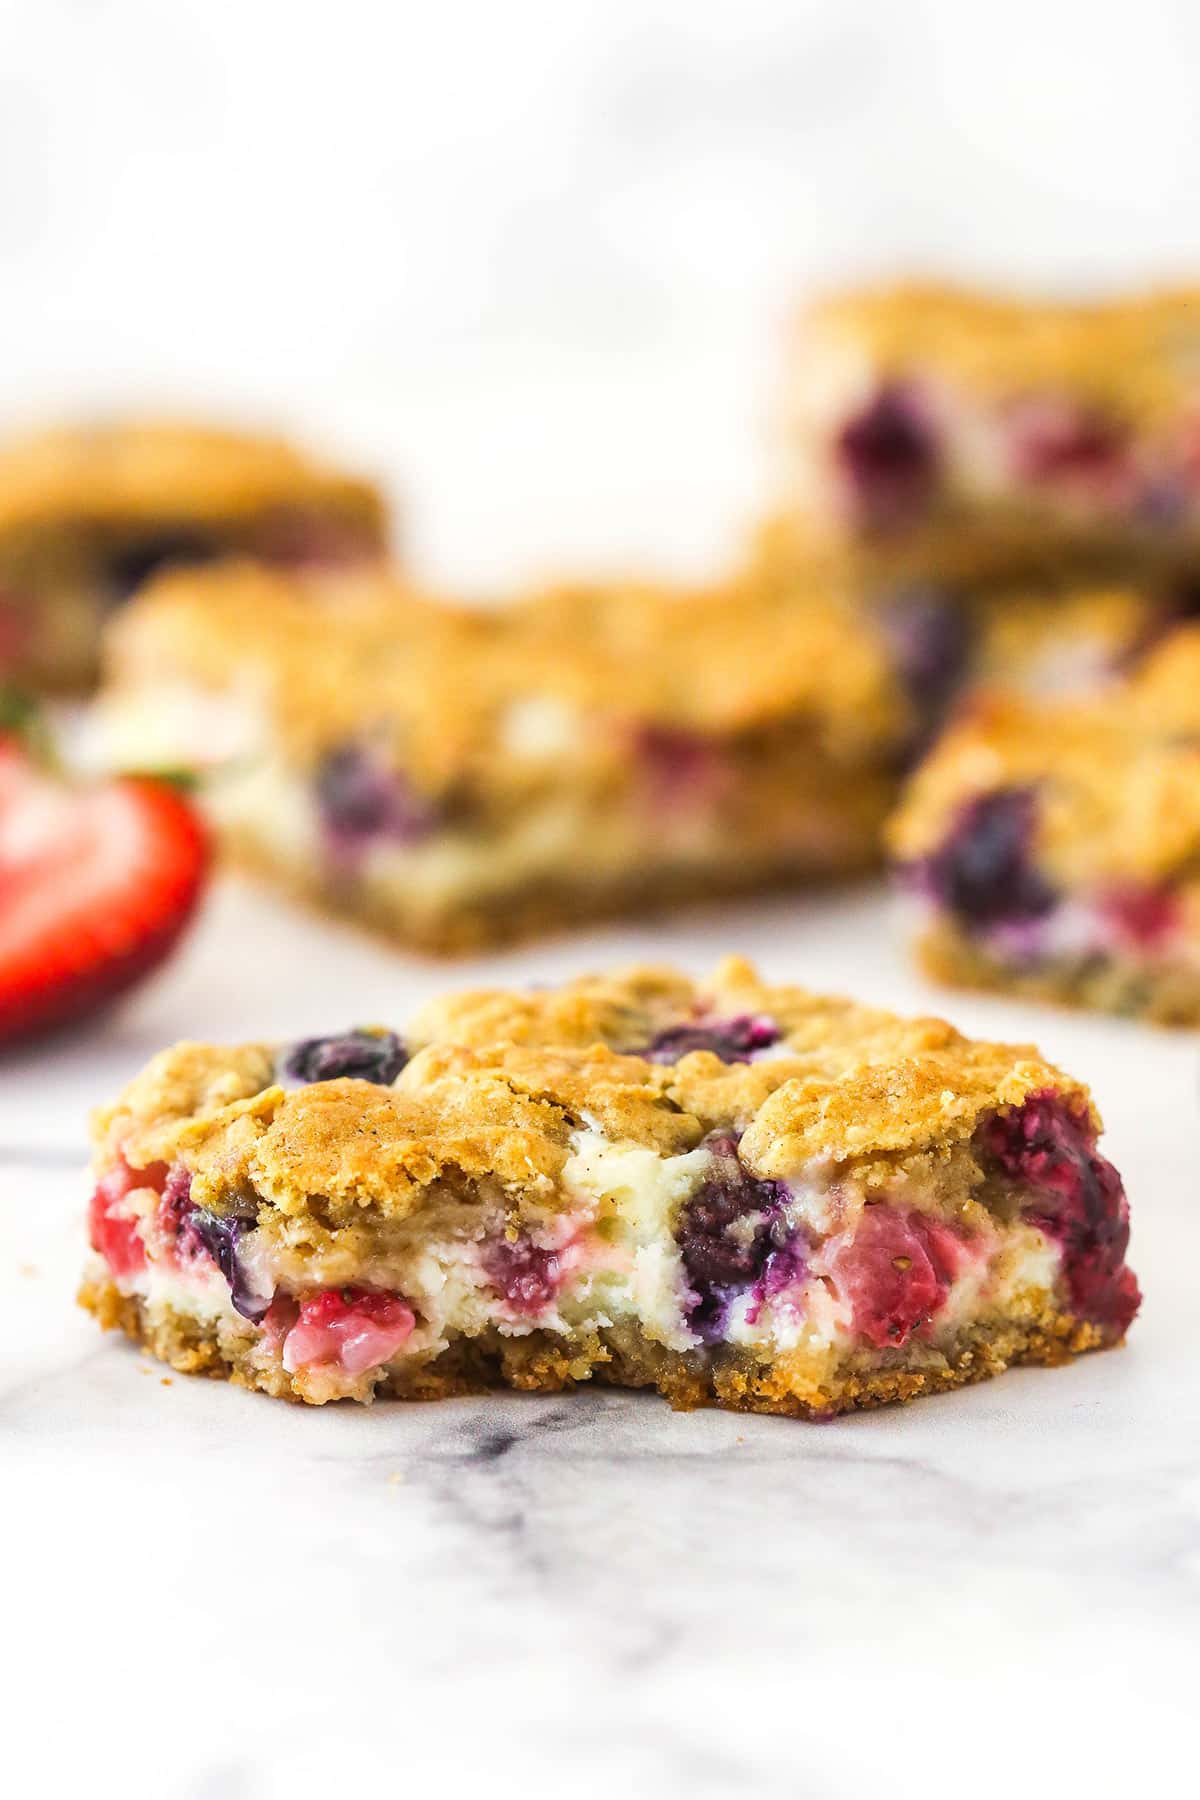 A berry oatmeal cheesecake bar on a countertop with a bite taken out of it.